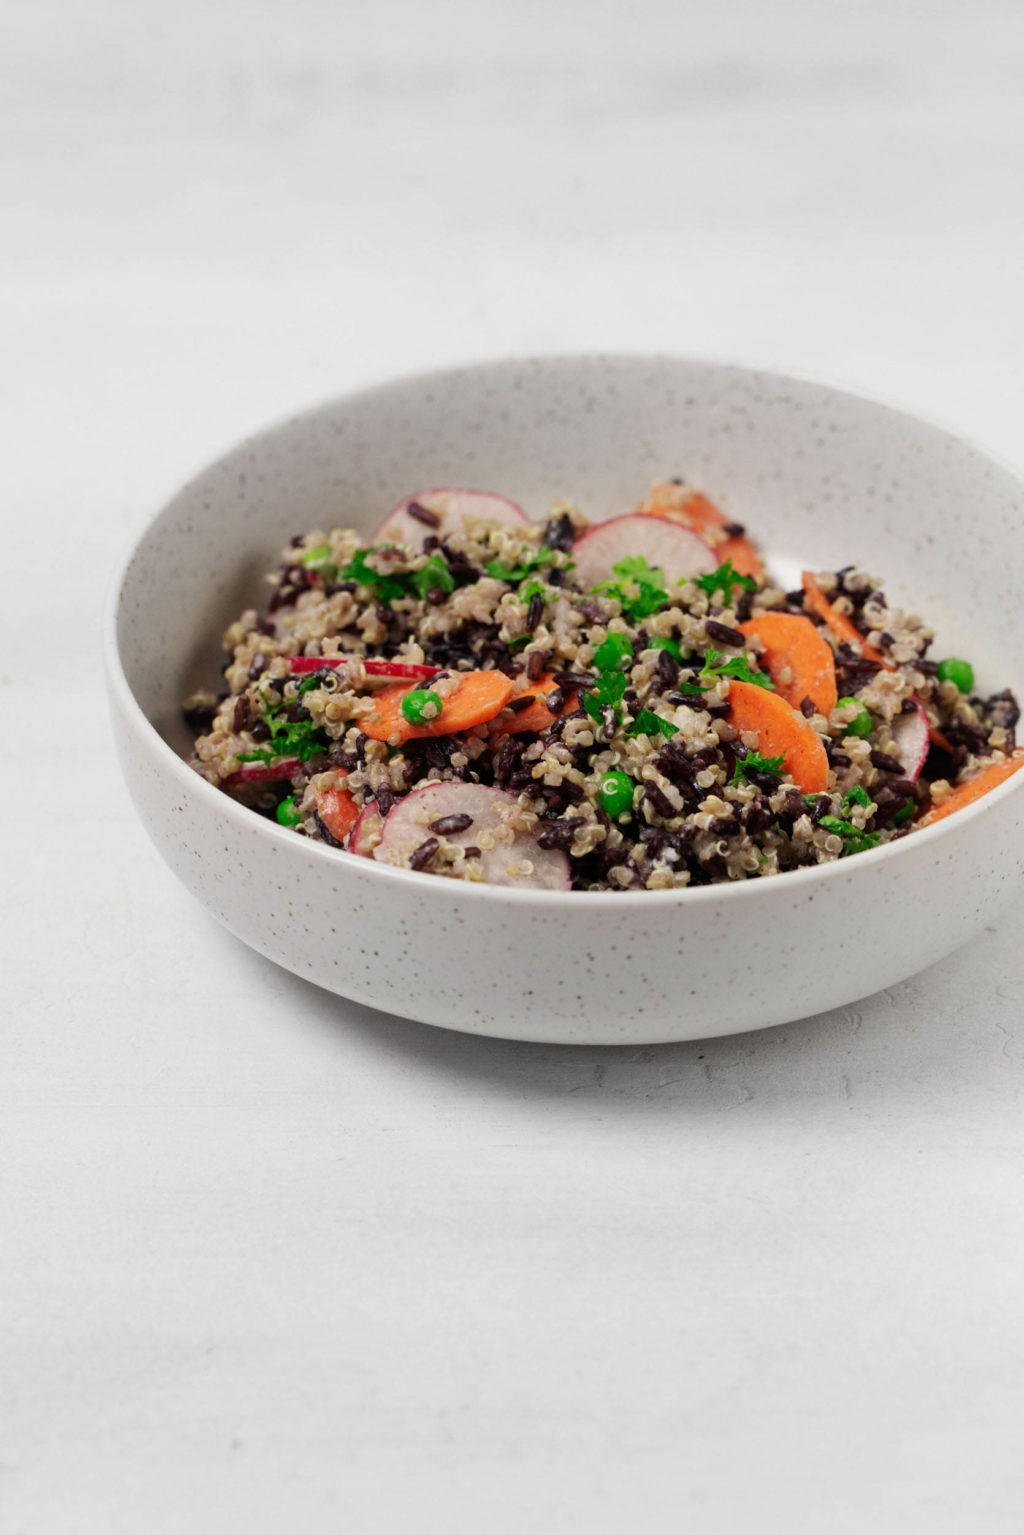 An angled image of a round white bowl, which is filled with a creamy, whole grain quinoa black rice salad.